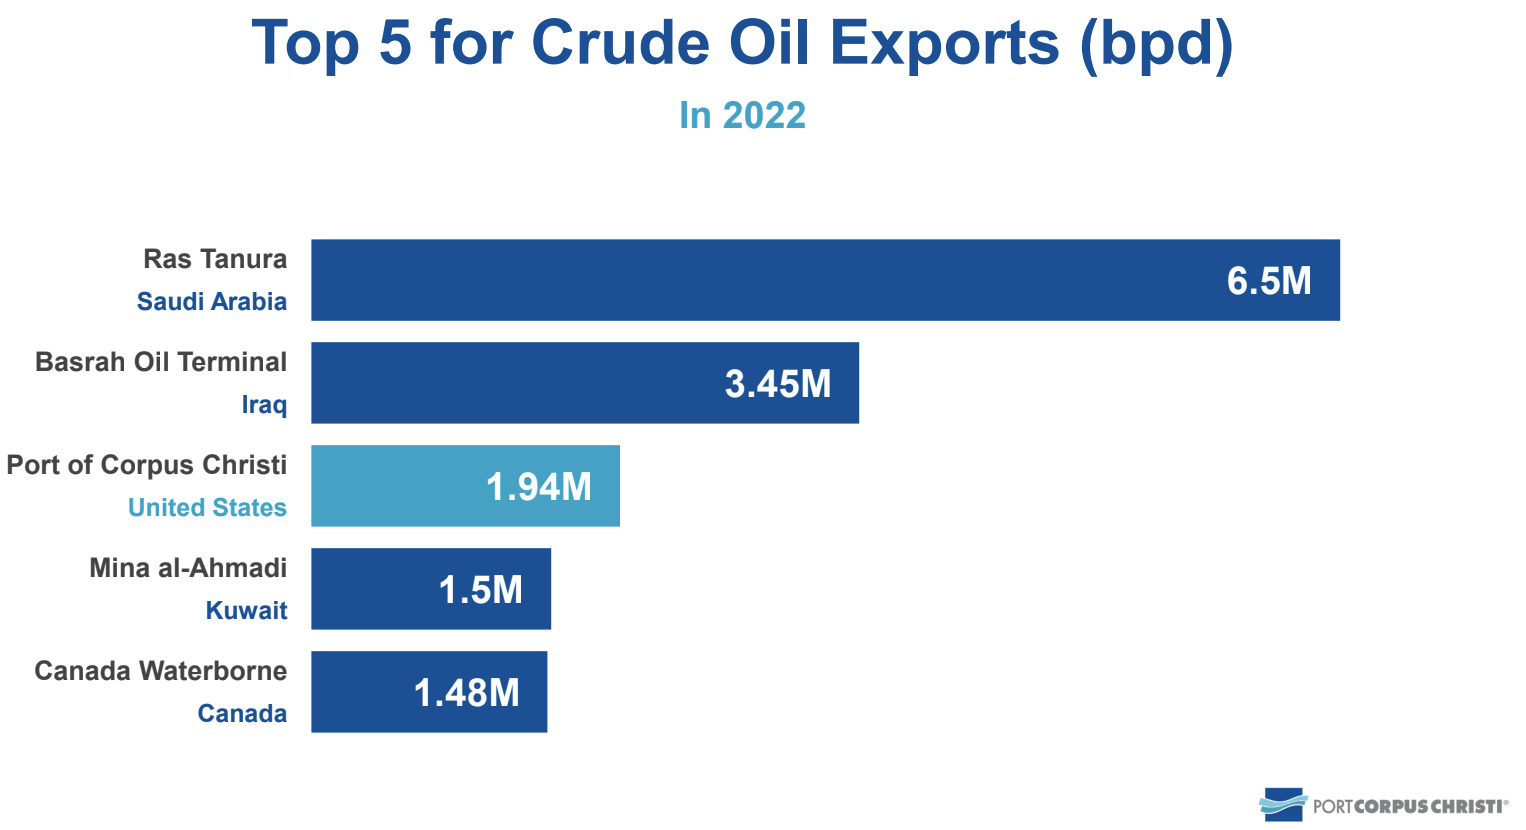 Top 5 for Crude Oil Exports